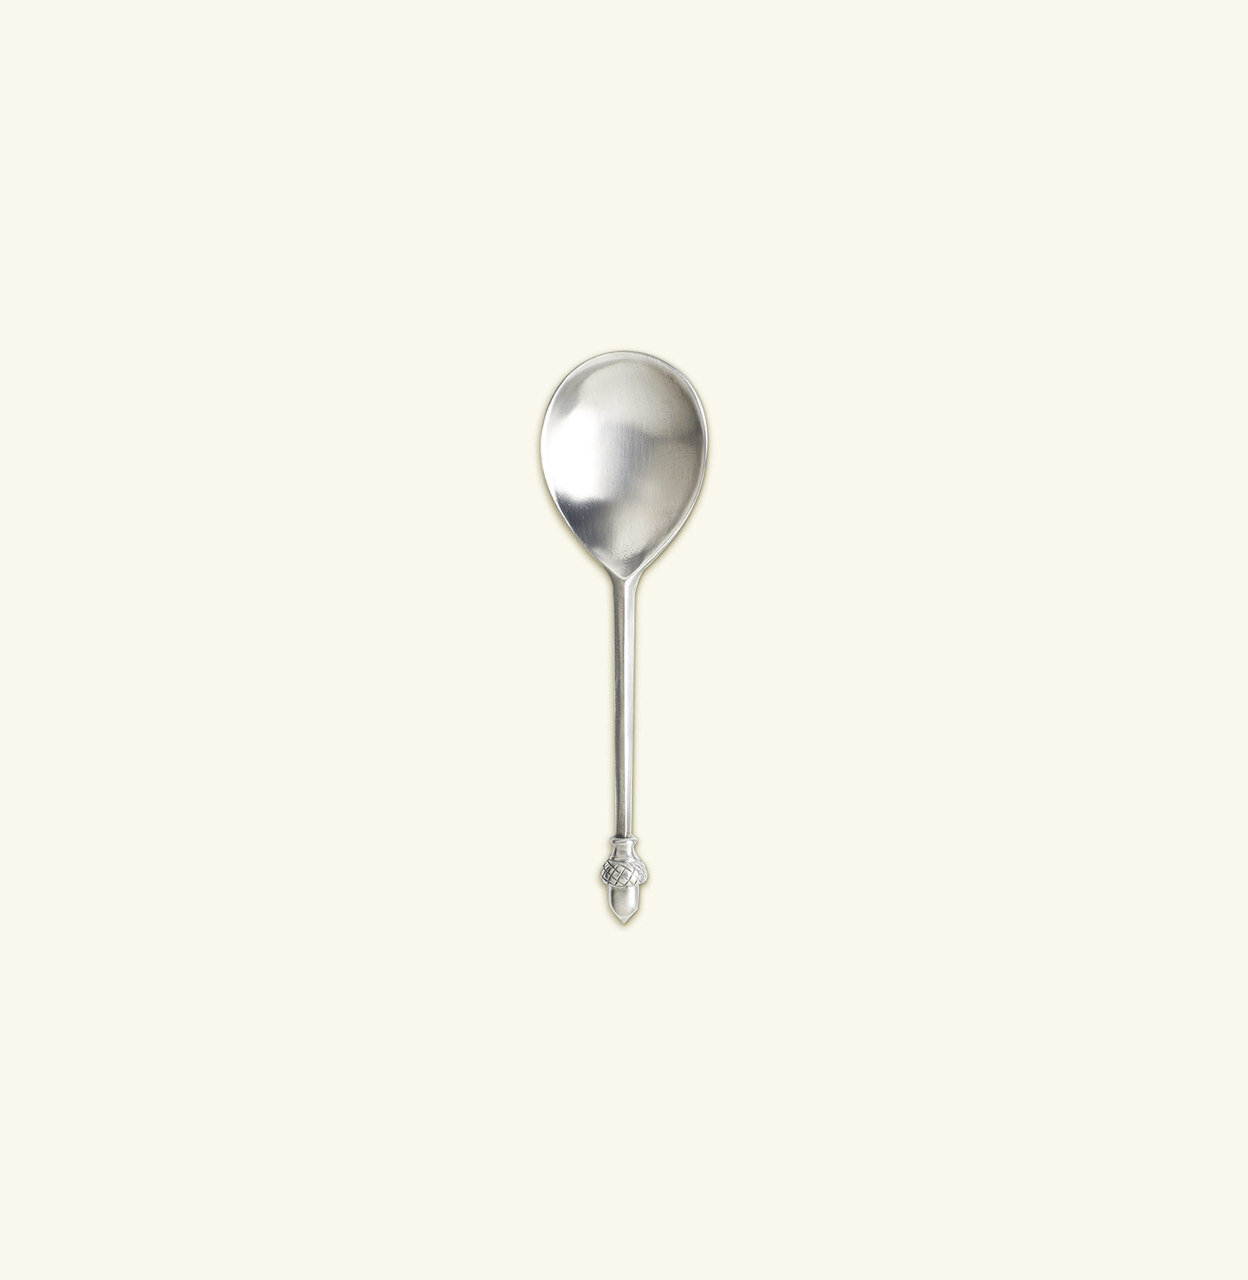 Match Pewter Acorn Spoon a845.0